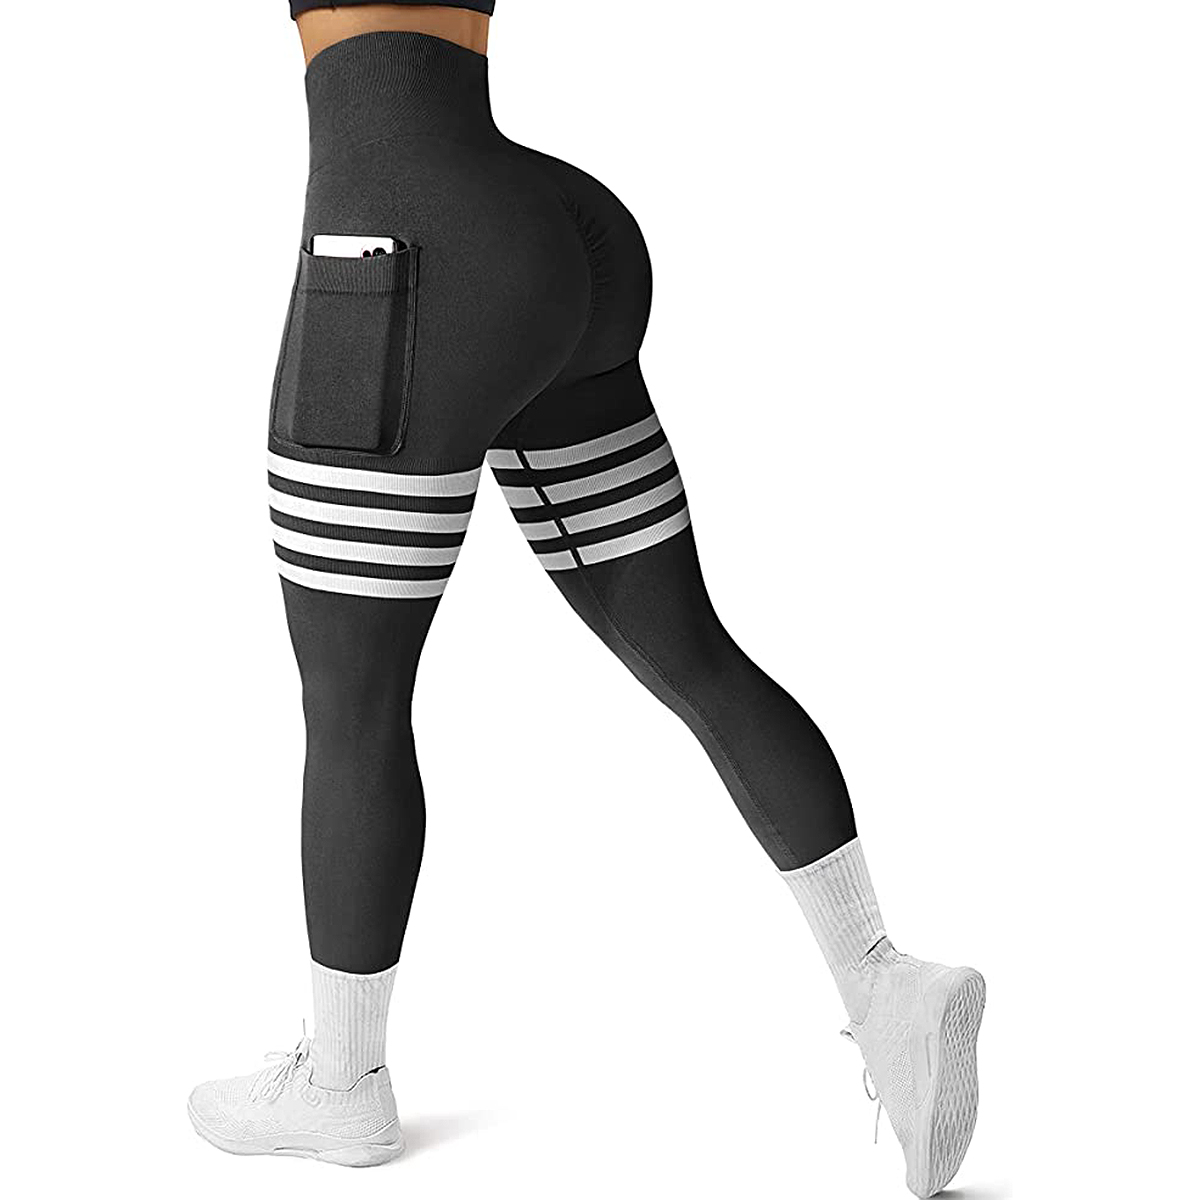 Buy Women Hight Waisted Workout Butt Lift Leggings Anti Cellulite Yoga  Pants Tights, Black, 3X-Large at Amazon.in